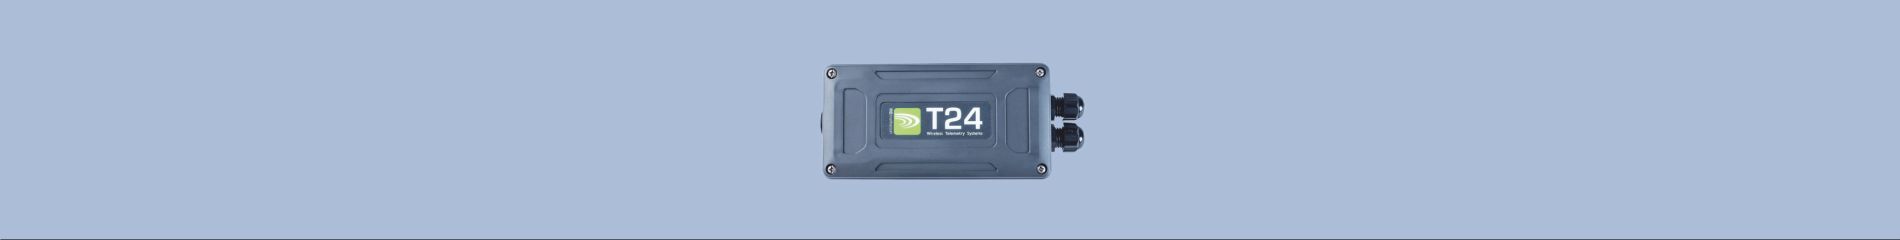 T24-SO Wireless Serial Output Module